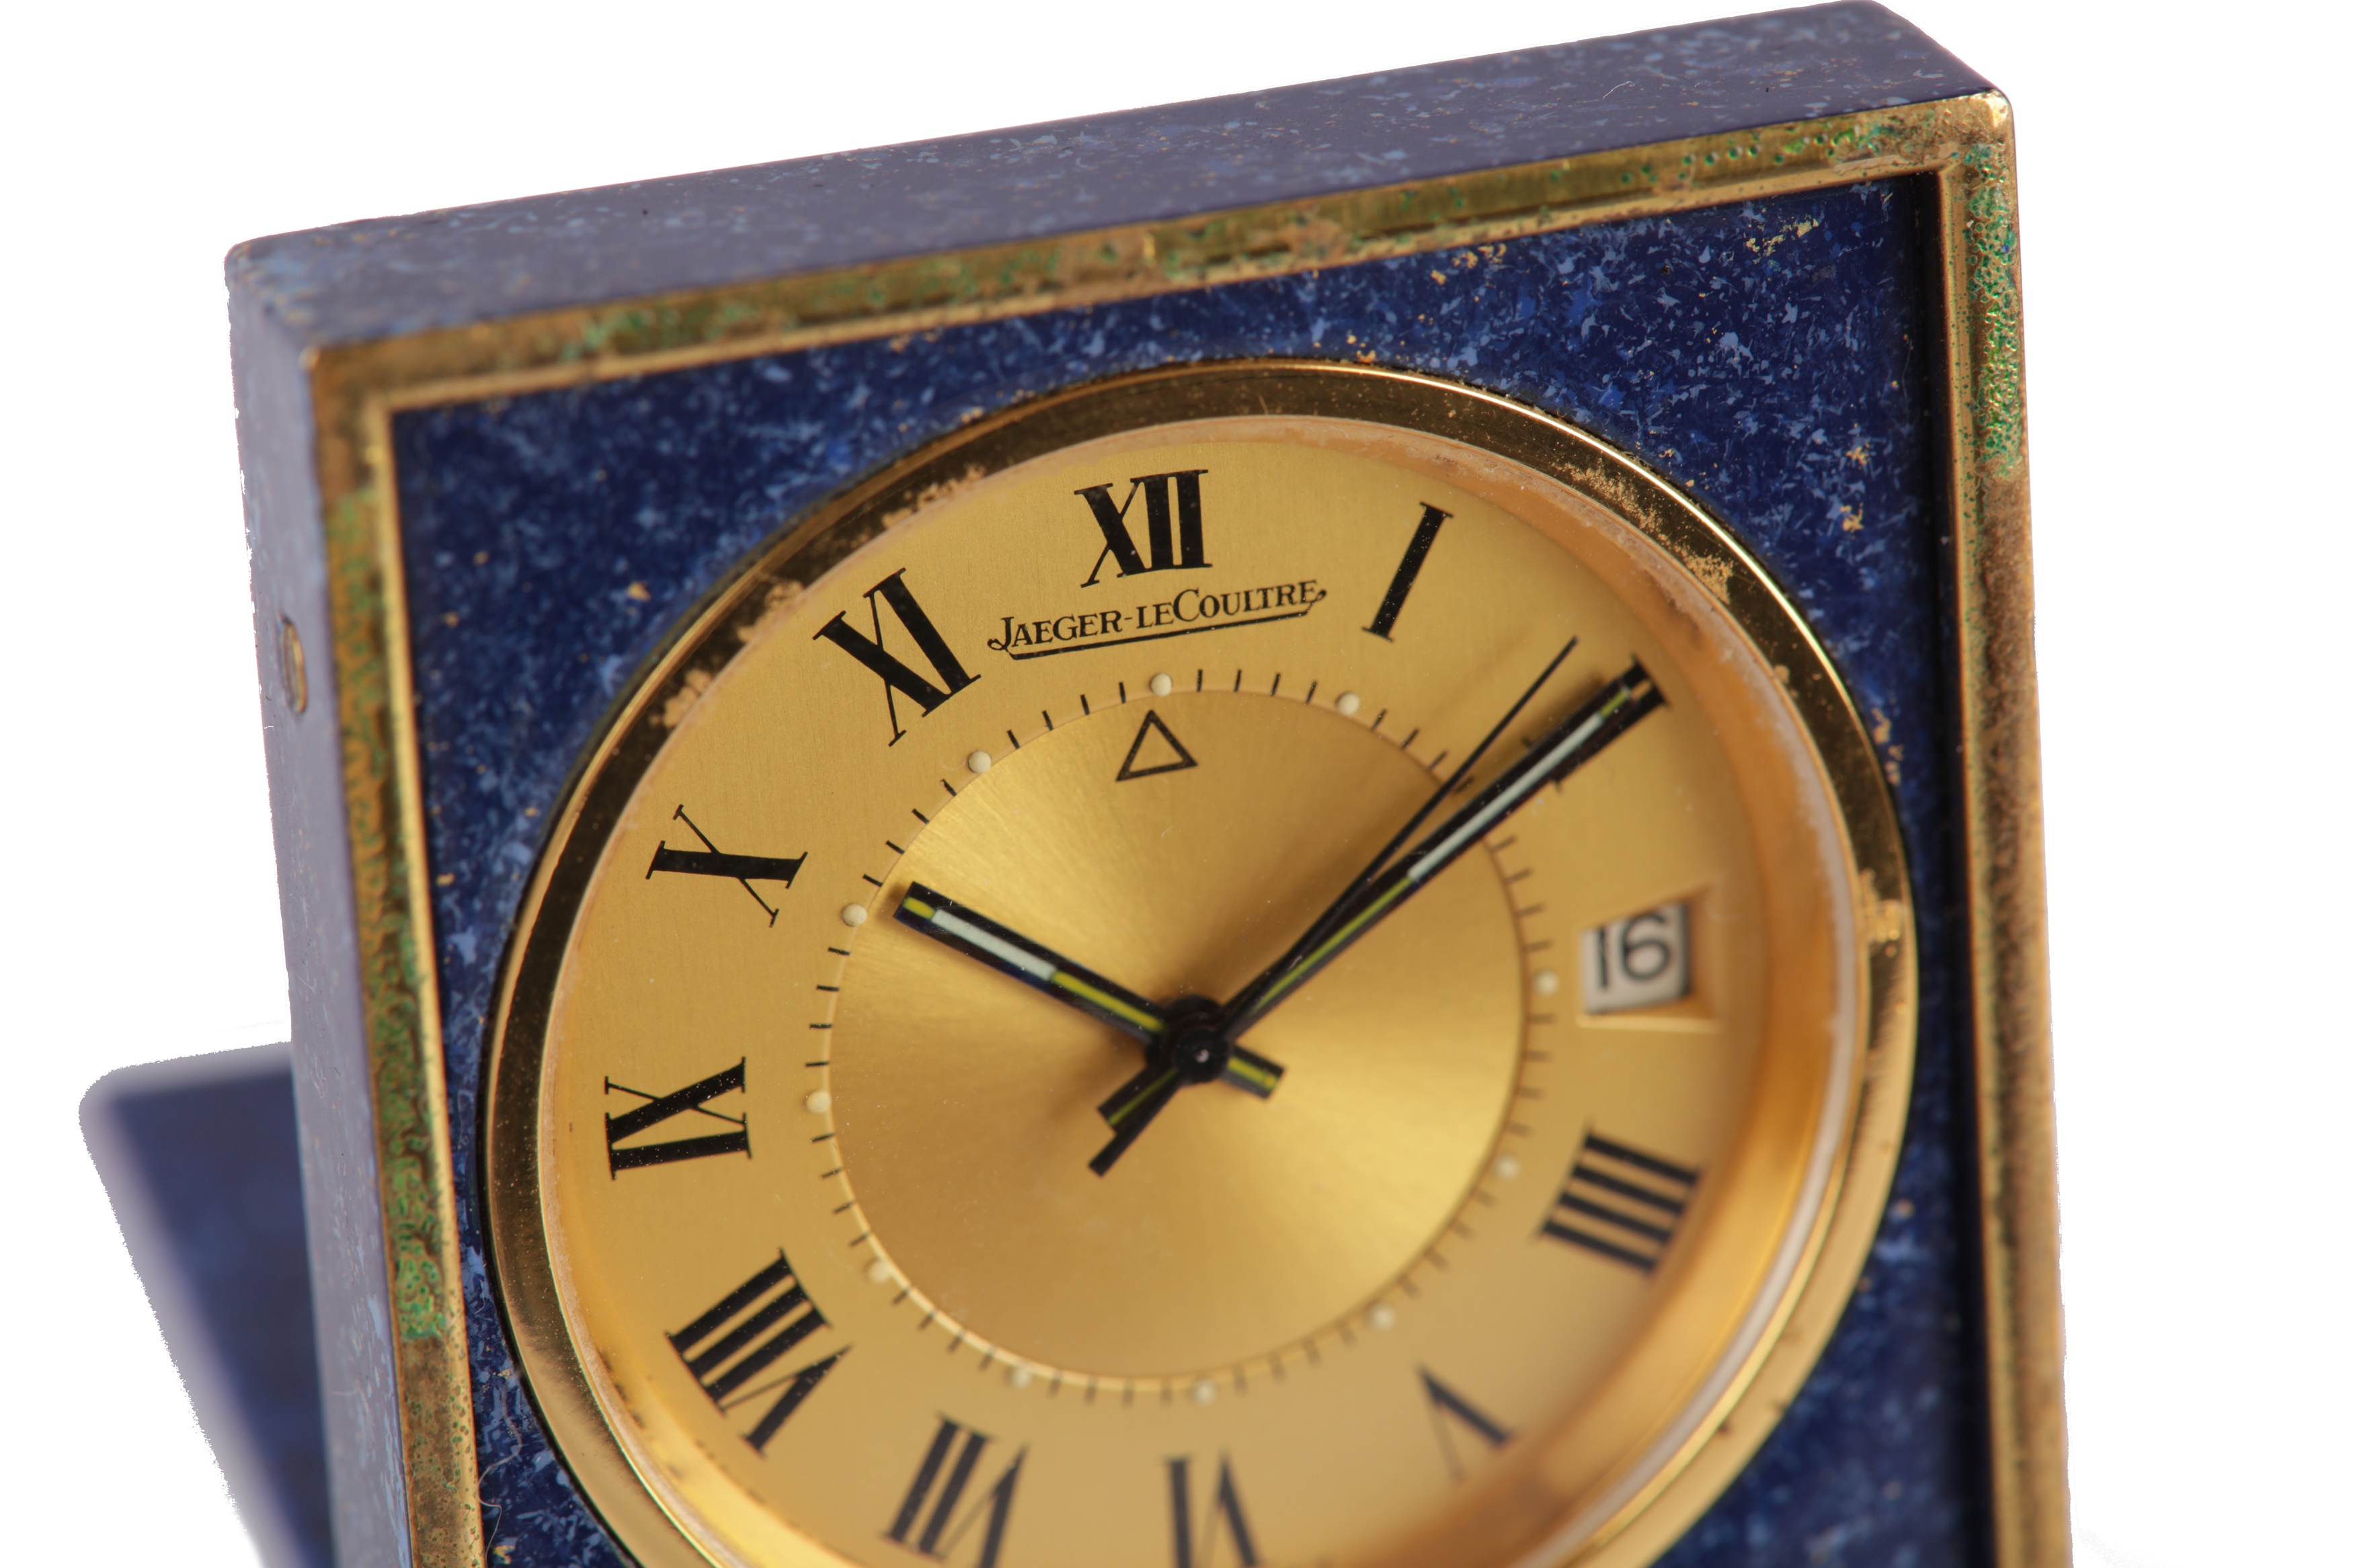 JAEGER-LECOULTRE. - Image 2 of 3